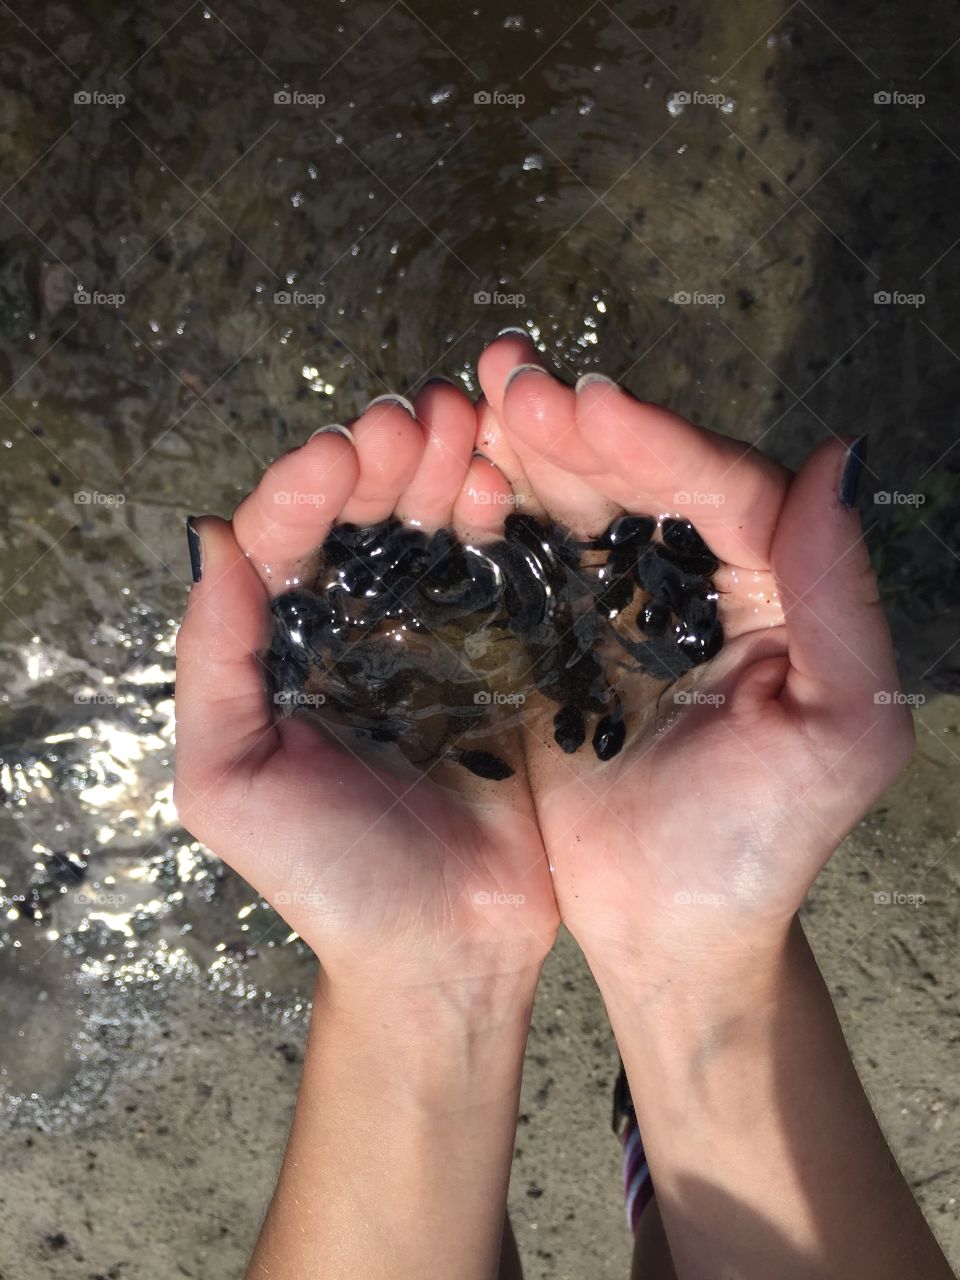 Tadpoles in some water in my hands